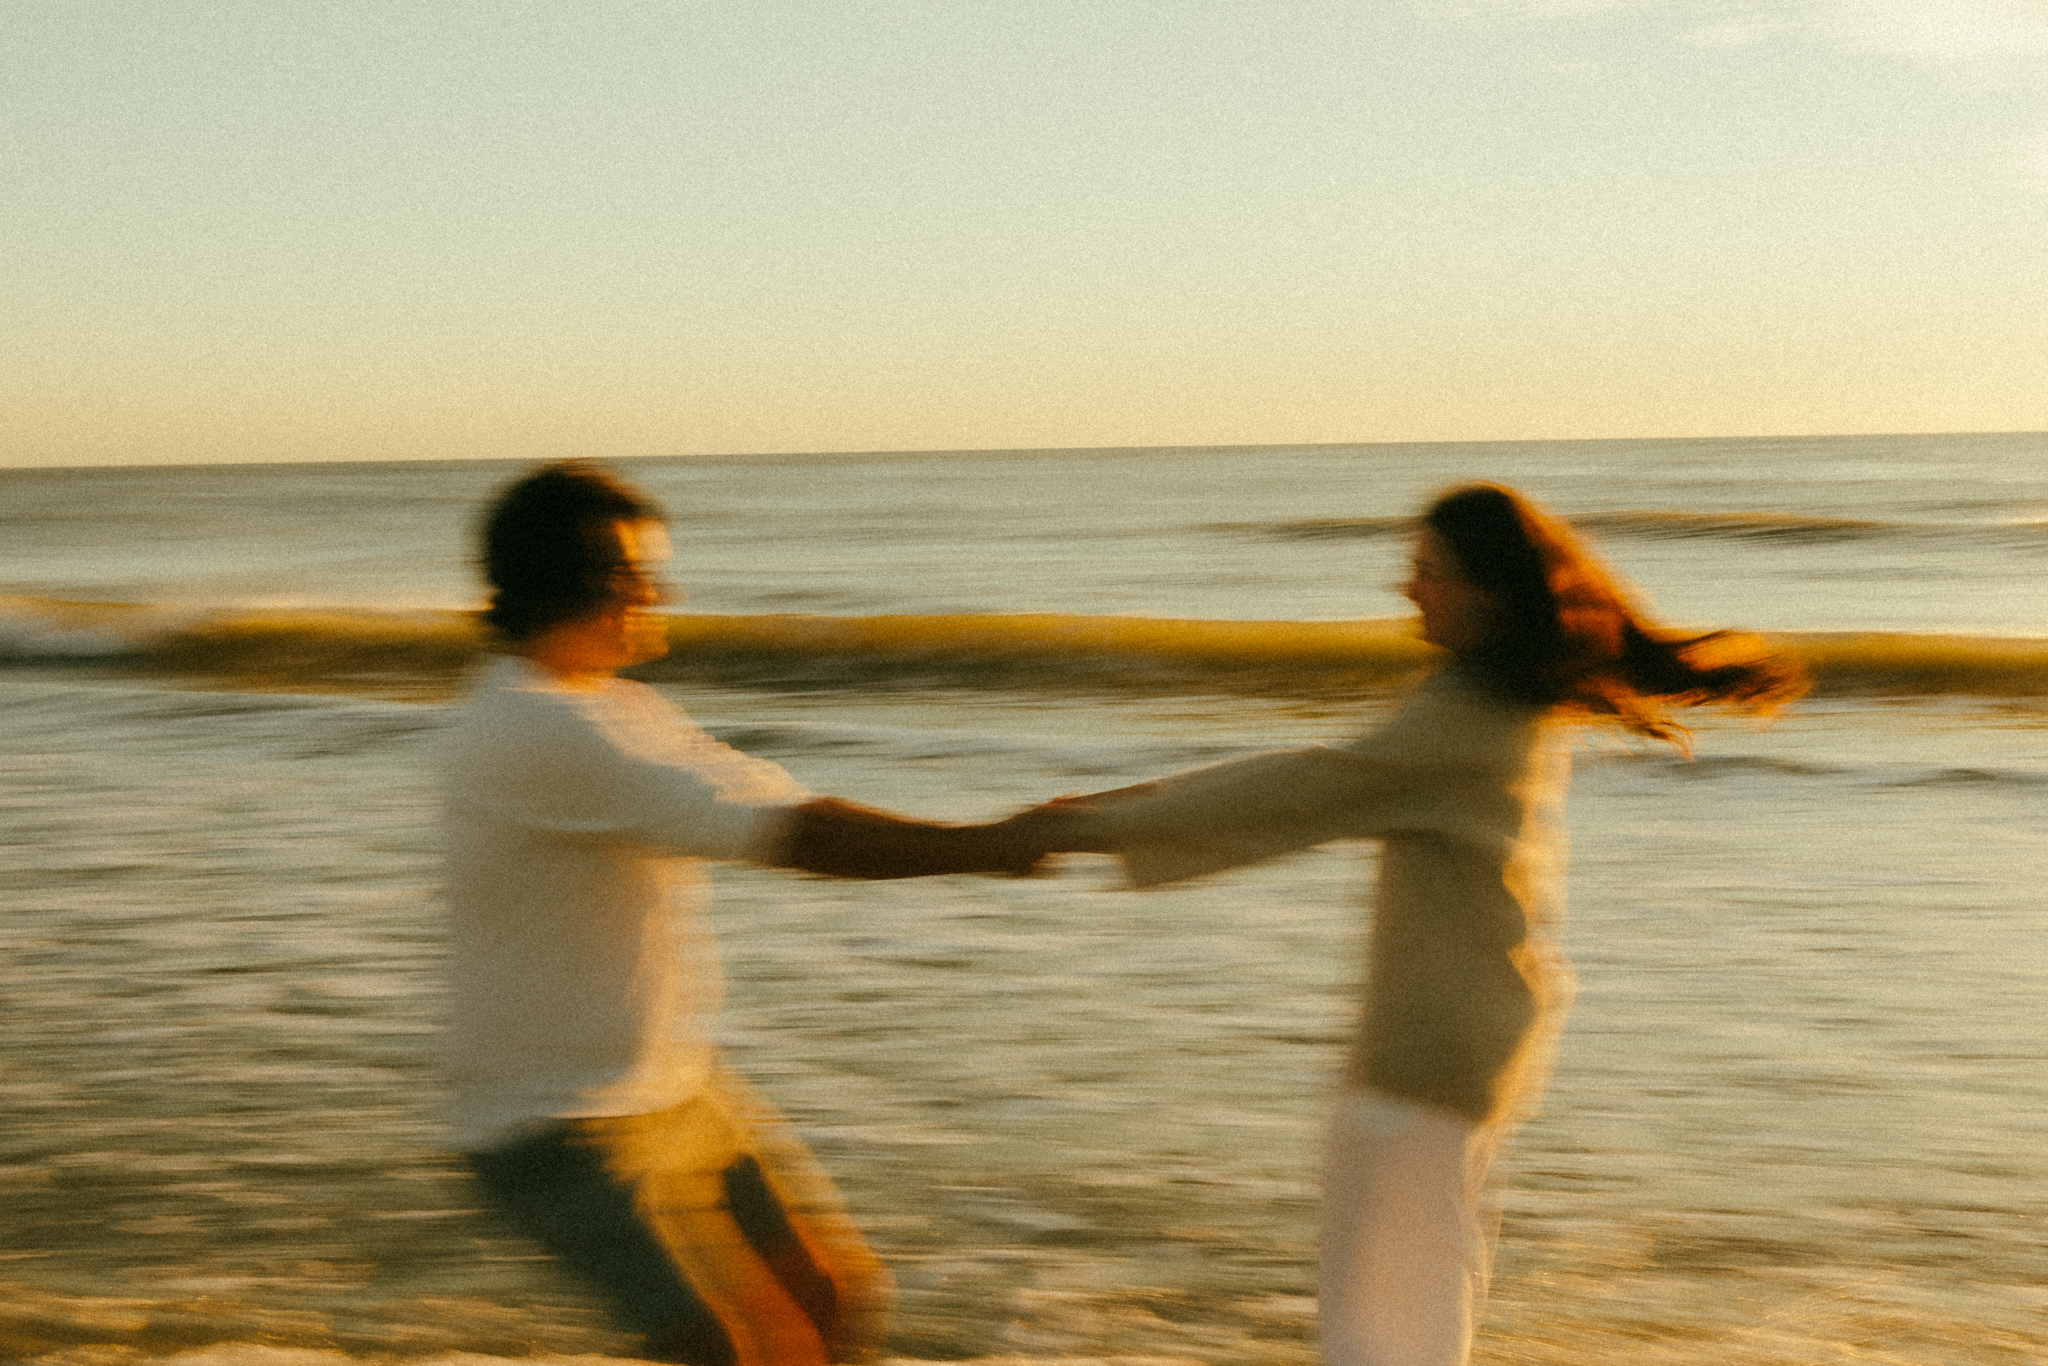 Motion blur photo of couple spinning on a Florida beach. Waves in the background